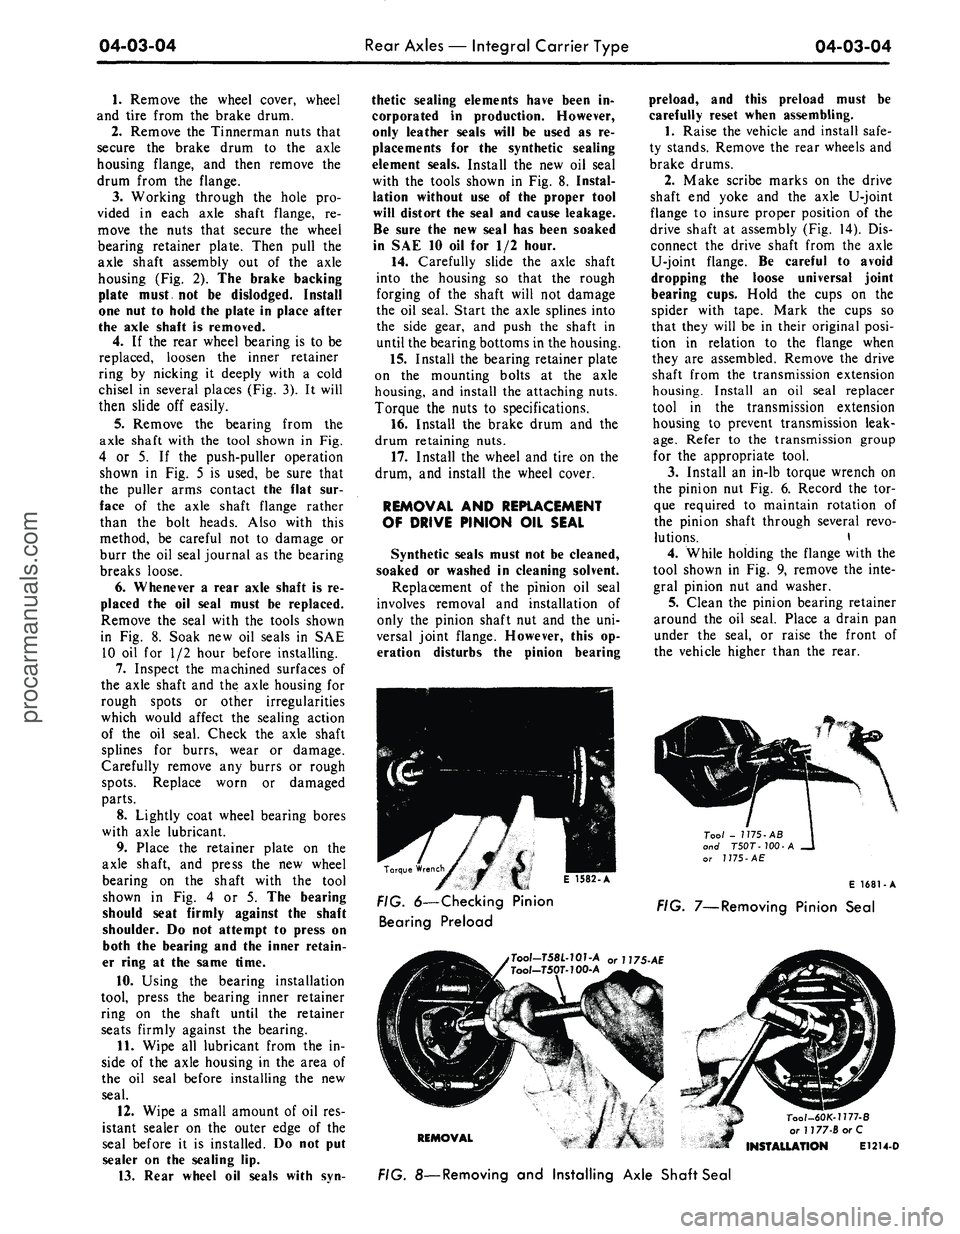 FORD MUSTANG 1969  Volume One Chassis 
04-03-04 
Rear Axles — Integral Carrier Type

04-03-04

1.
 Remove the wheel cover, wheel

and tire from the brake drum.

2.
 Remove the Tinnerman nuts that

secure the brake drum to the axle

hous